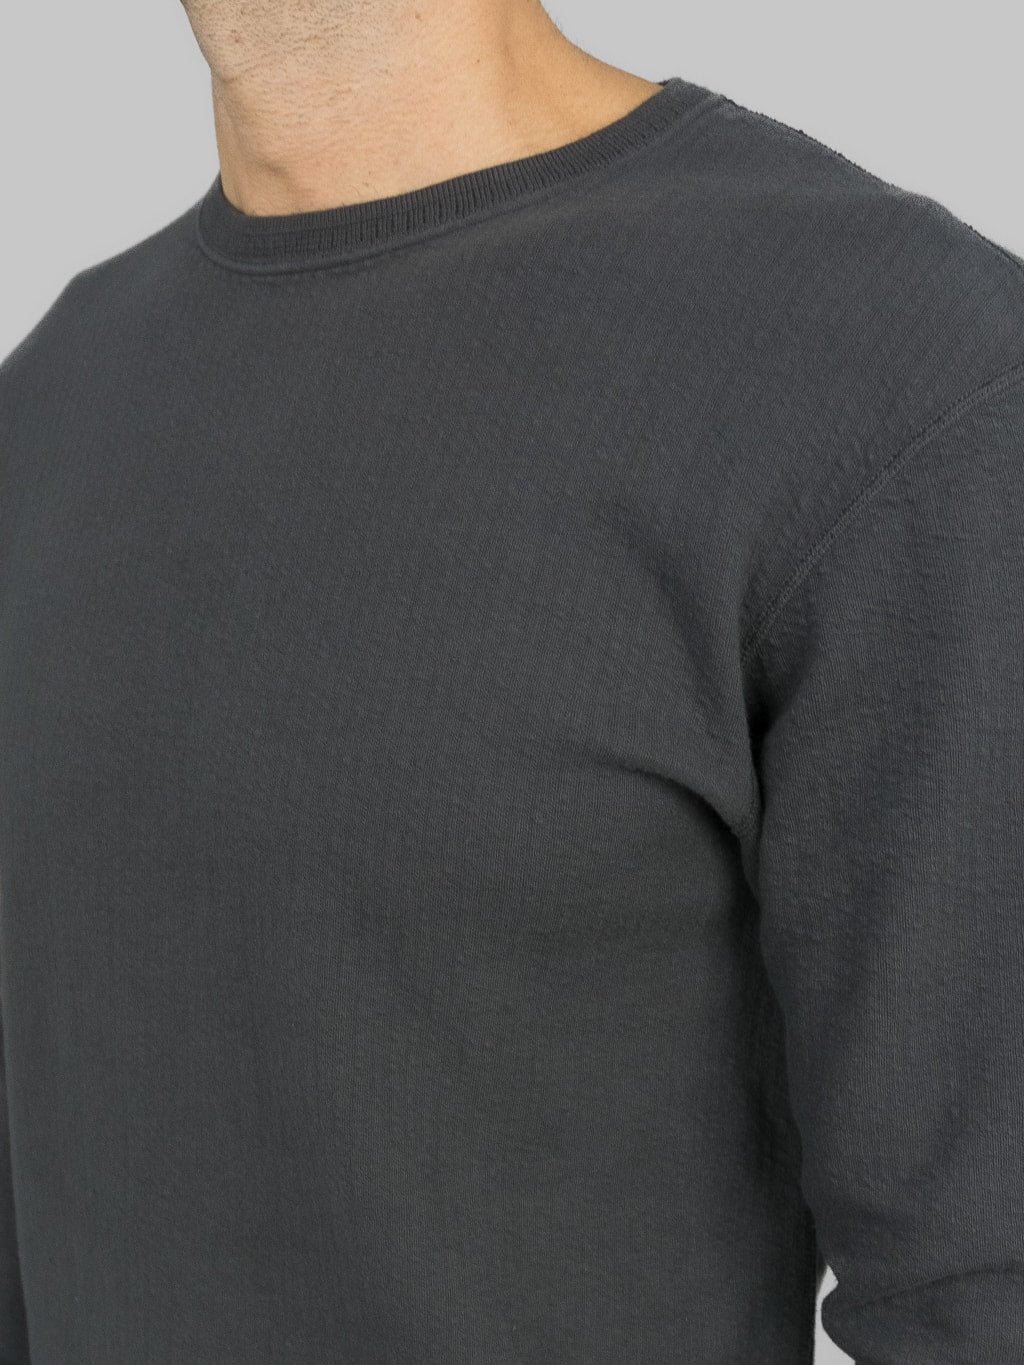 Loop Weft Double Face Jacquard crewneck Thermal antique black collar